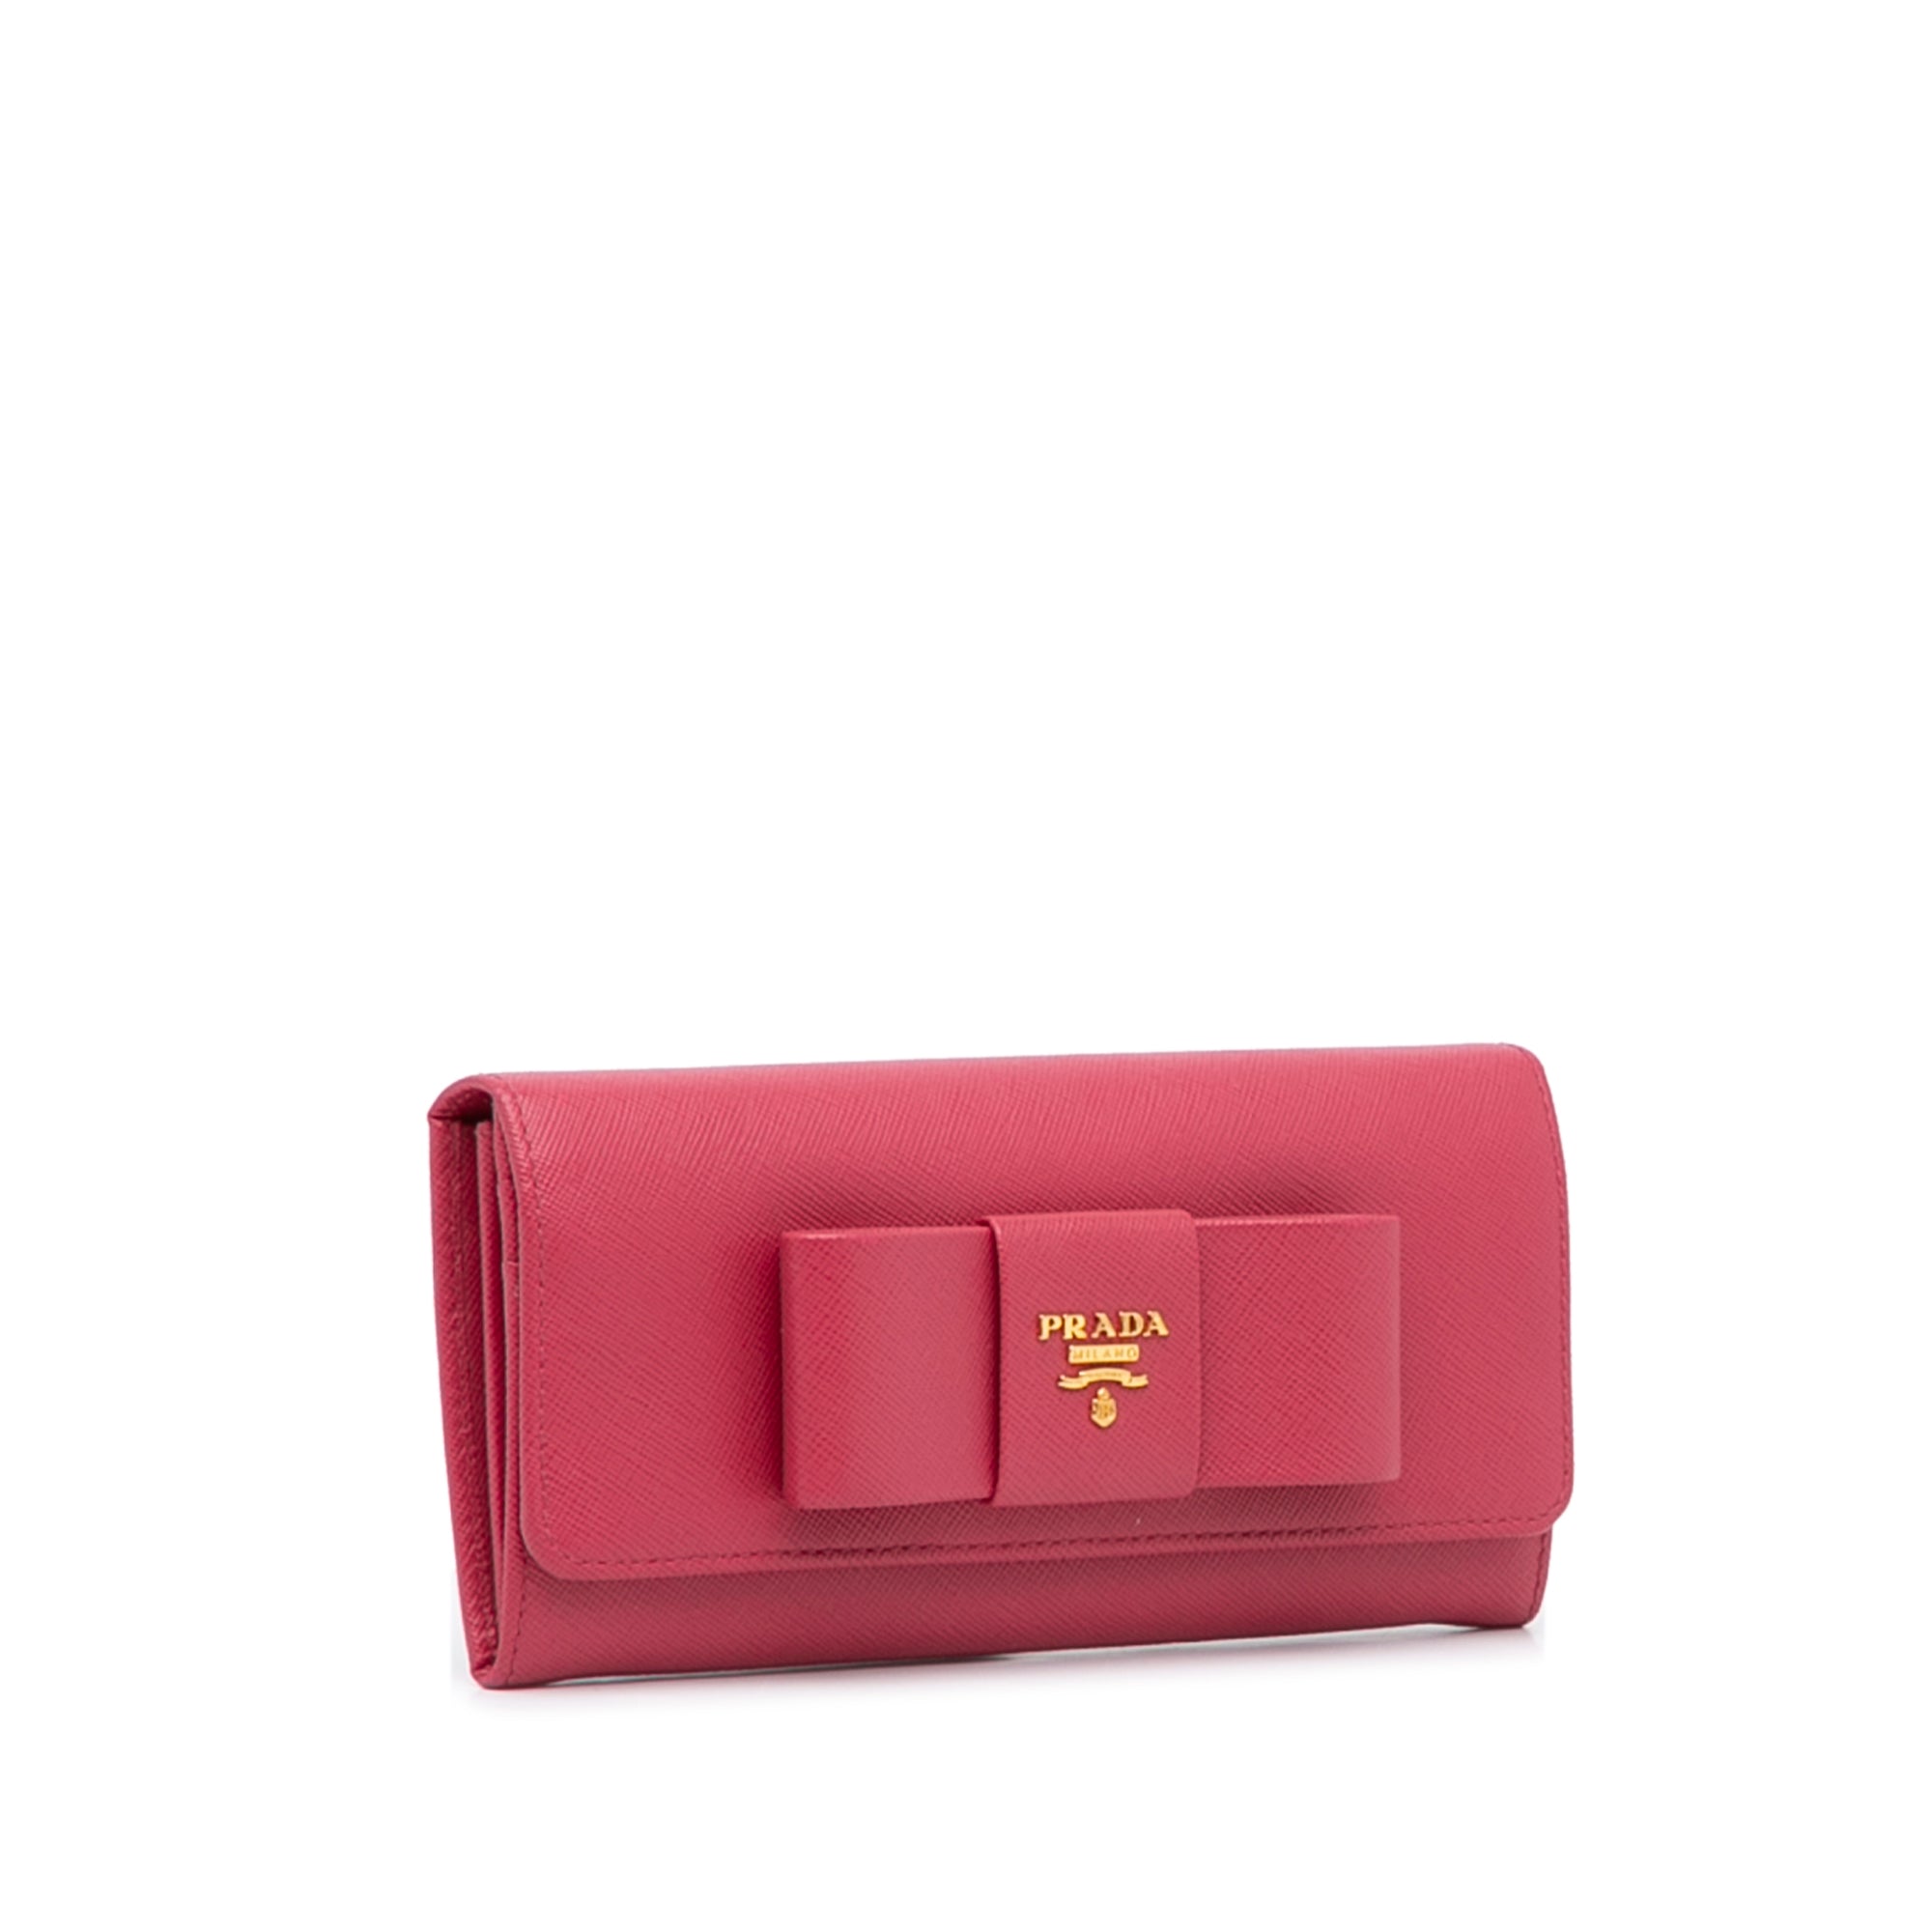 Authentic Prada Pink Bow Wallet 